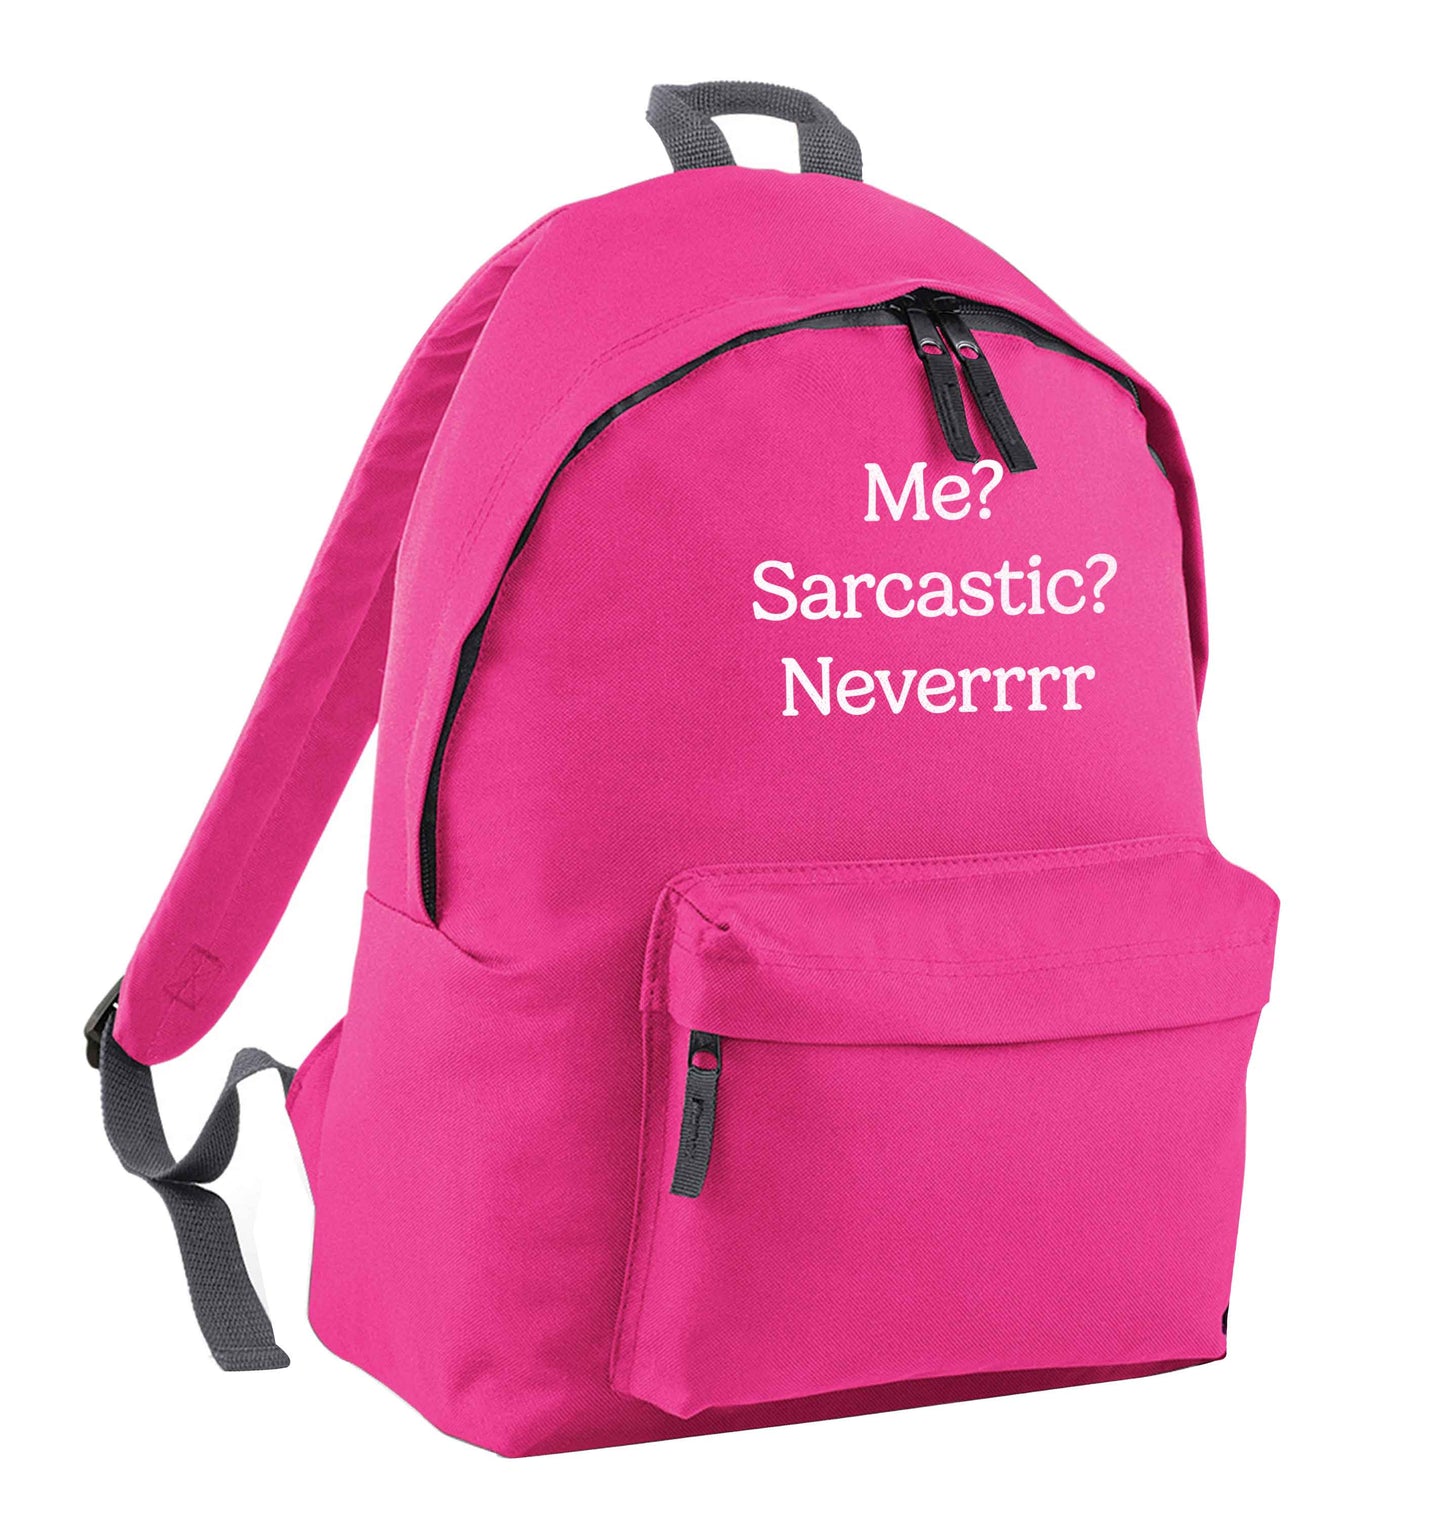 Me? sarcastic? never pink adults backpack